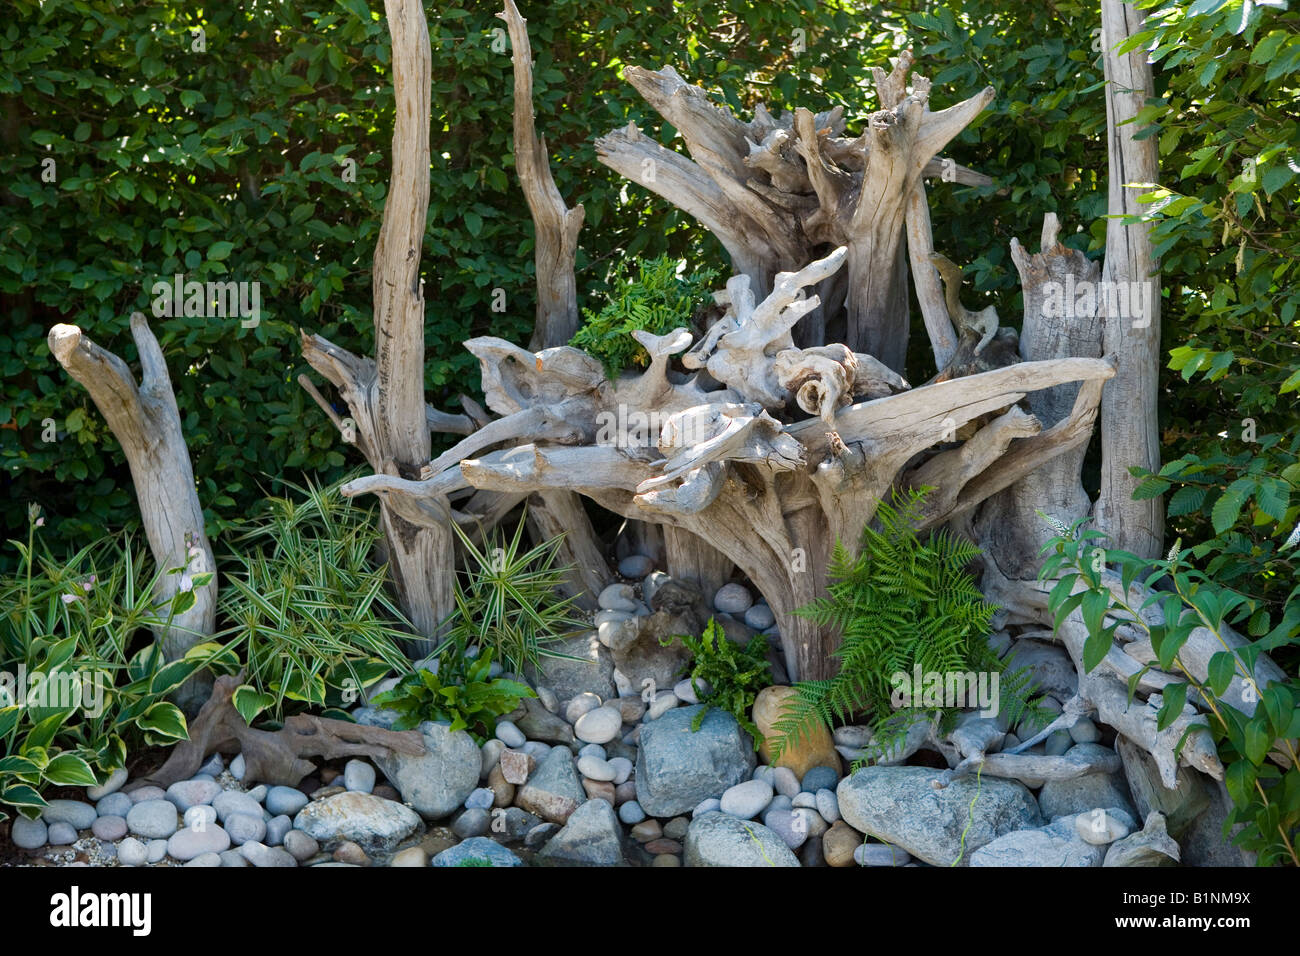 dead tree roots and stumps used as a garden feature Stock Photo